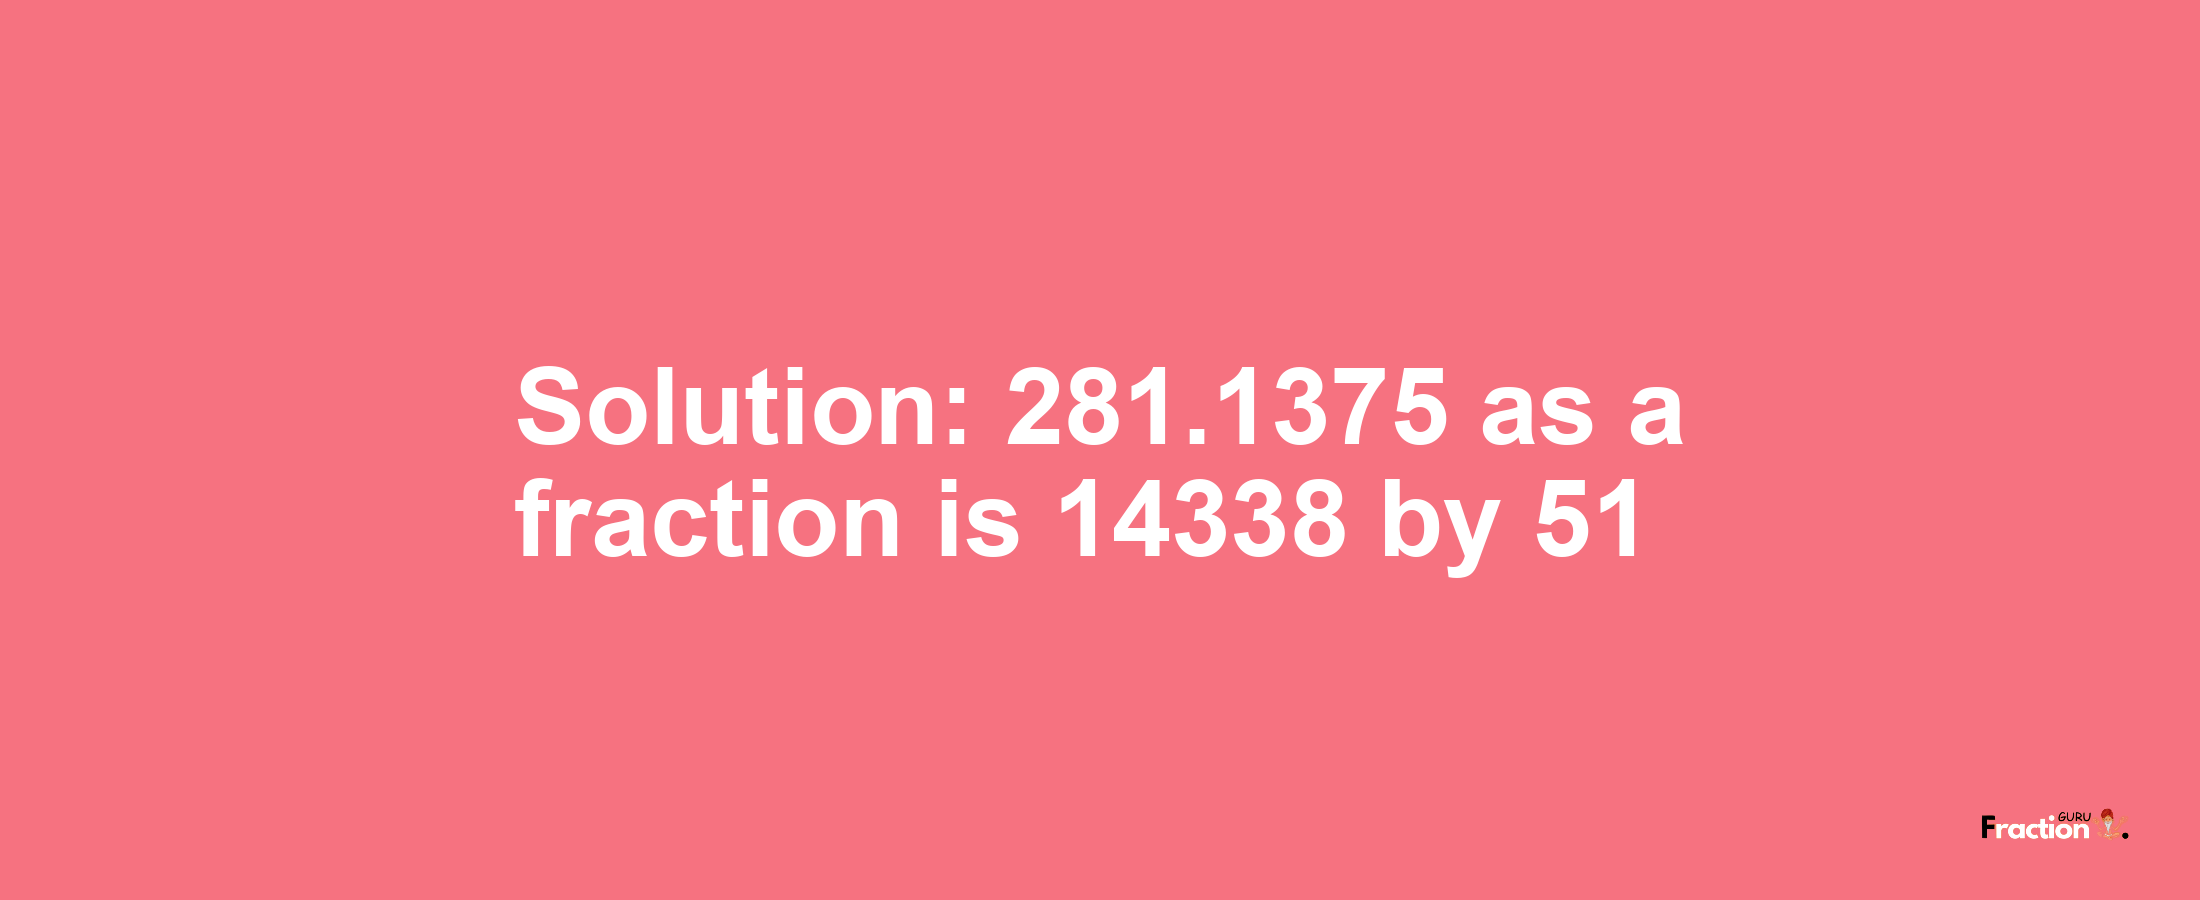 Solution:281.1375 as a fraction is 14338/51